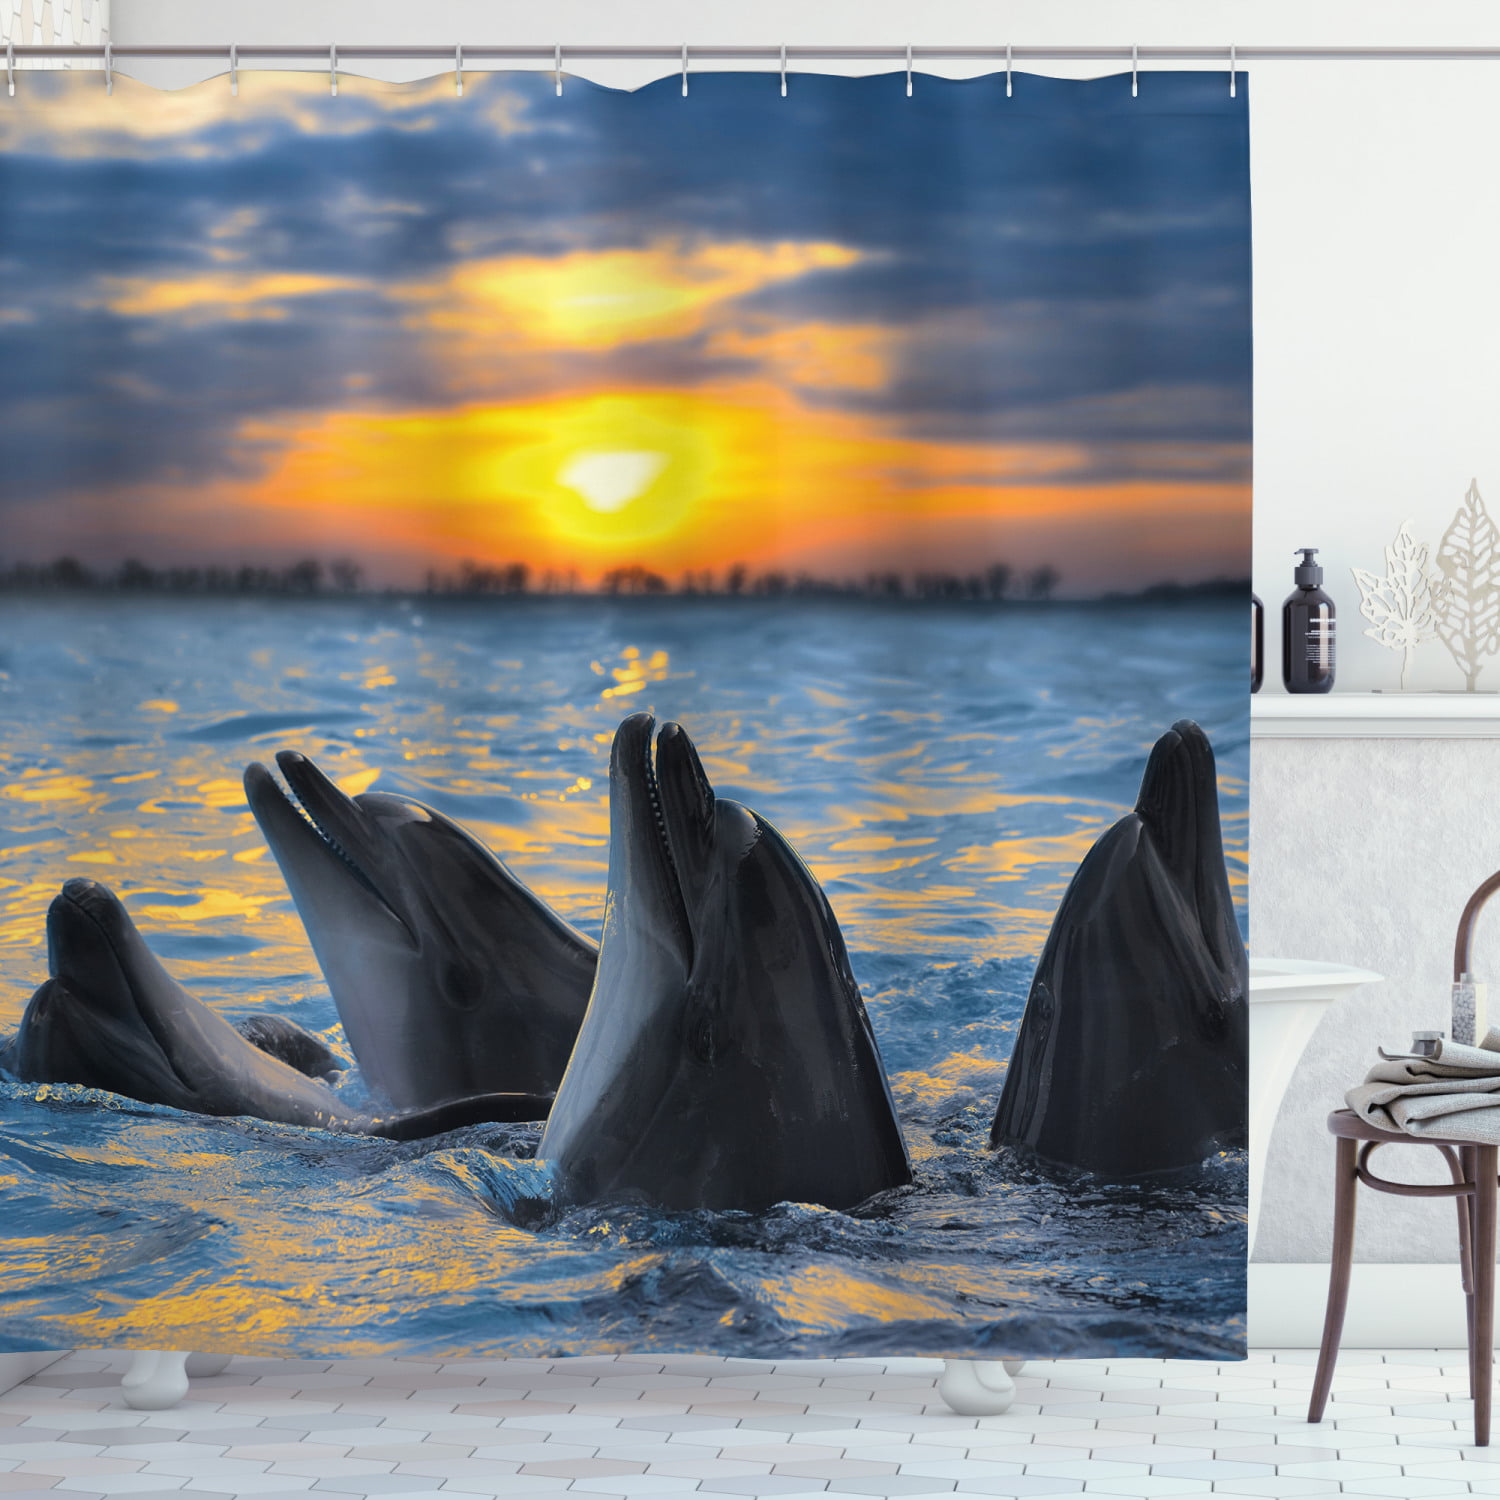 60x72" 100% Polyester Waterproof Fabric Dolphin Hole Shower Curtain Peel Panel 1 